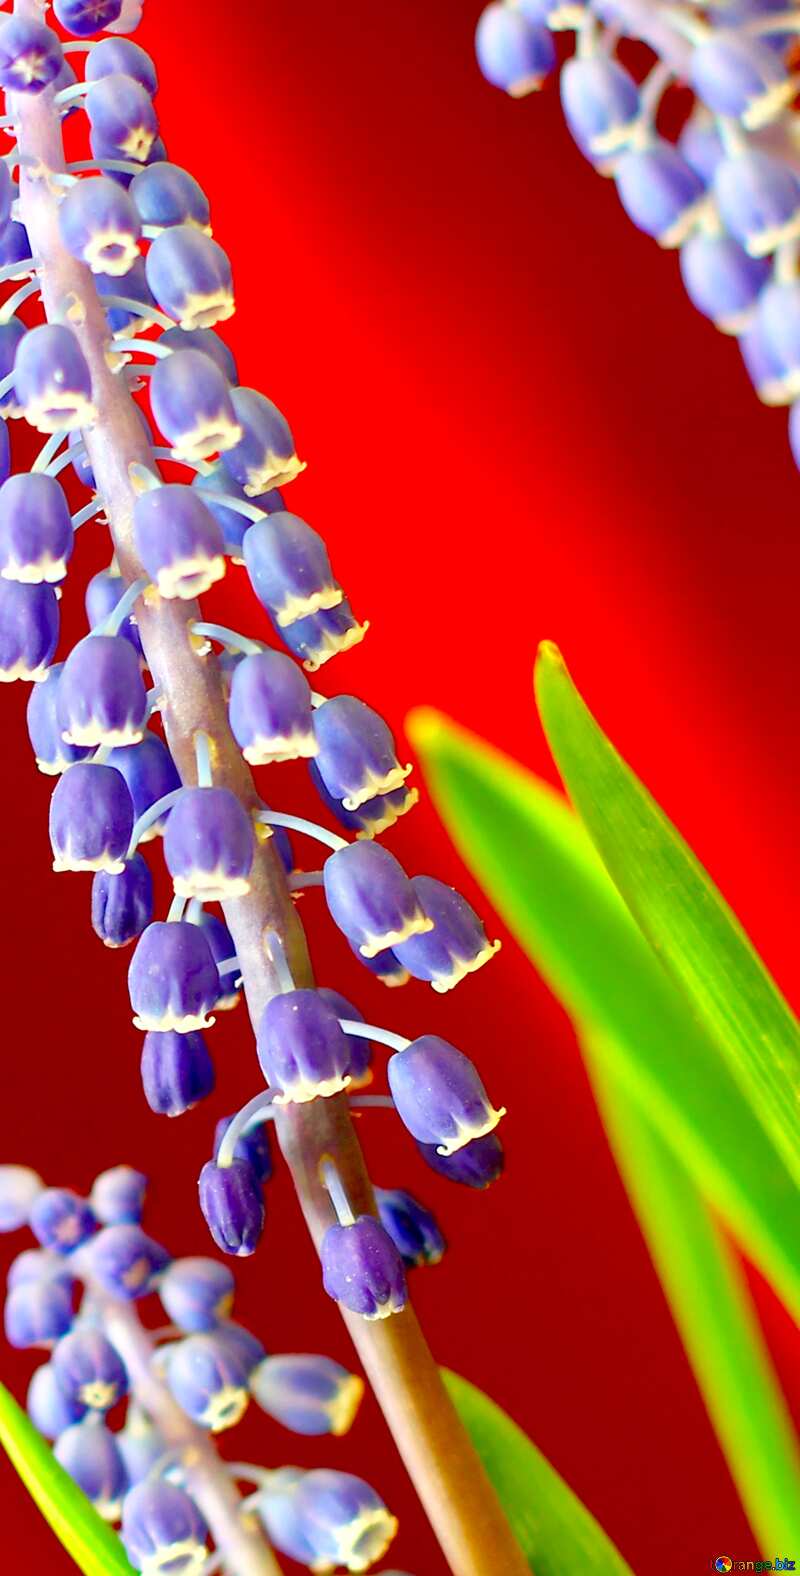 Image for profile picture Muscari flower. №29780